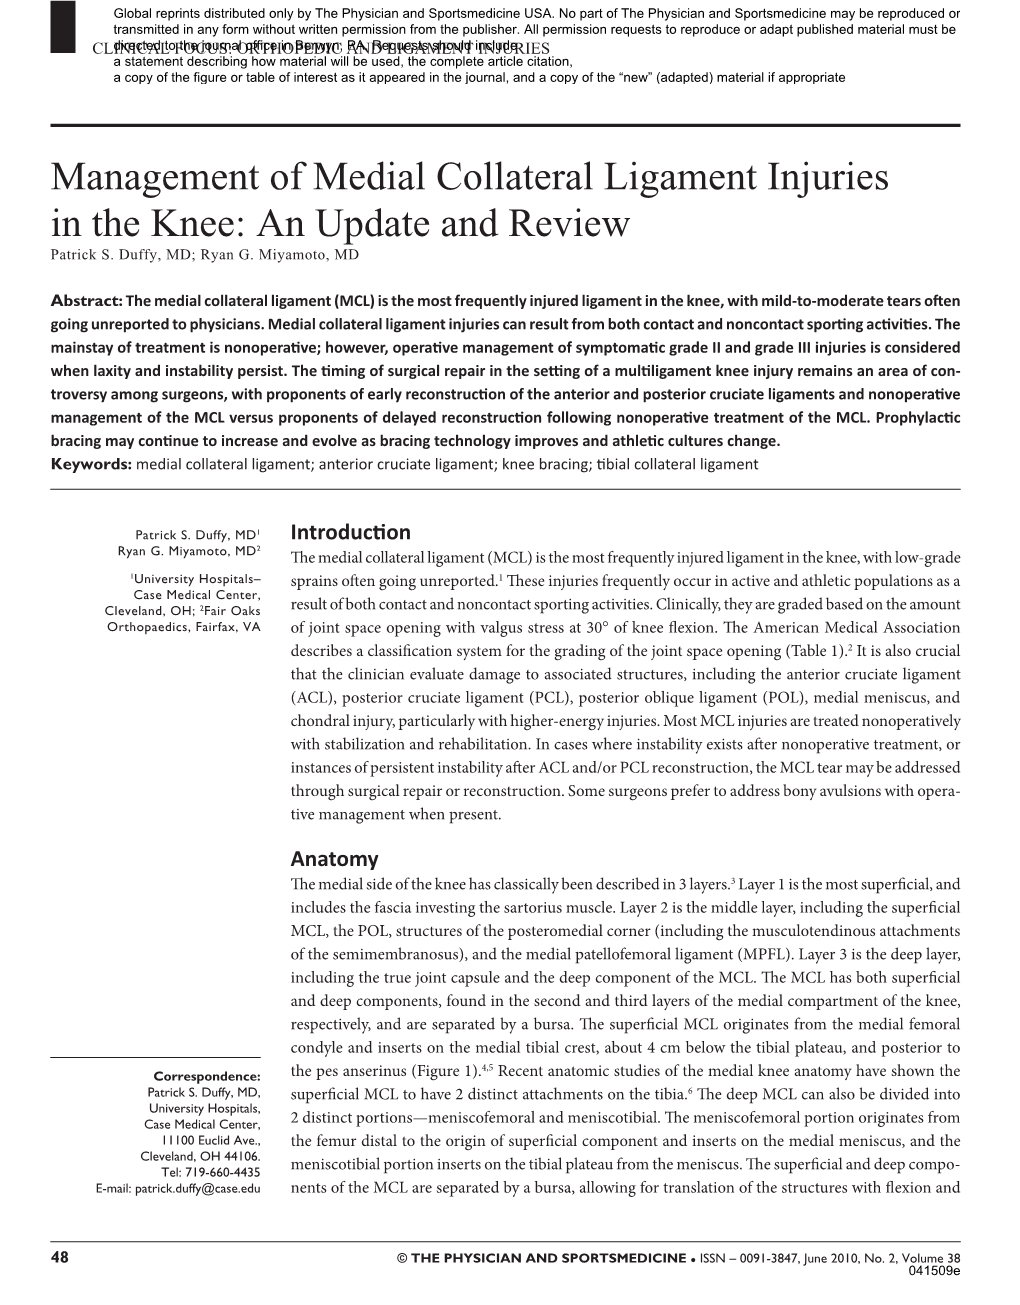 Management of Medial Collateral Ligament Injuries in the Knee: an Update and Review Patrick S